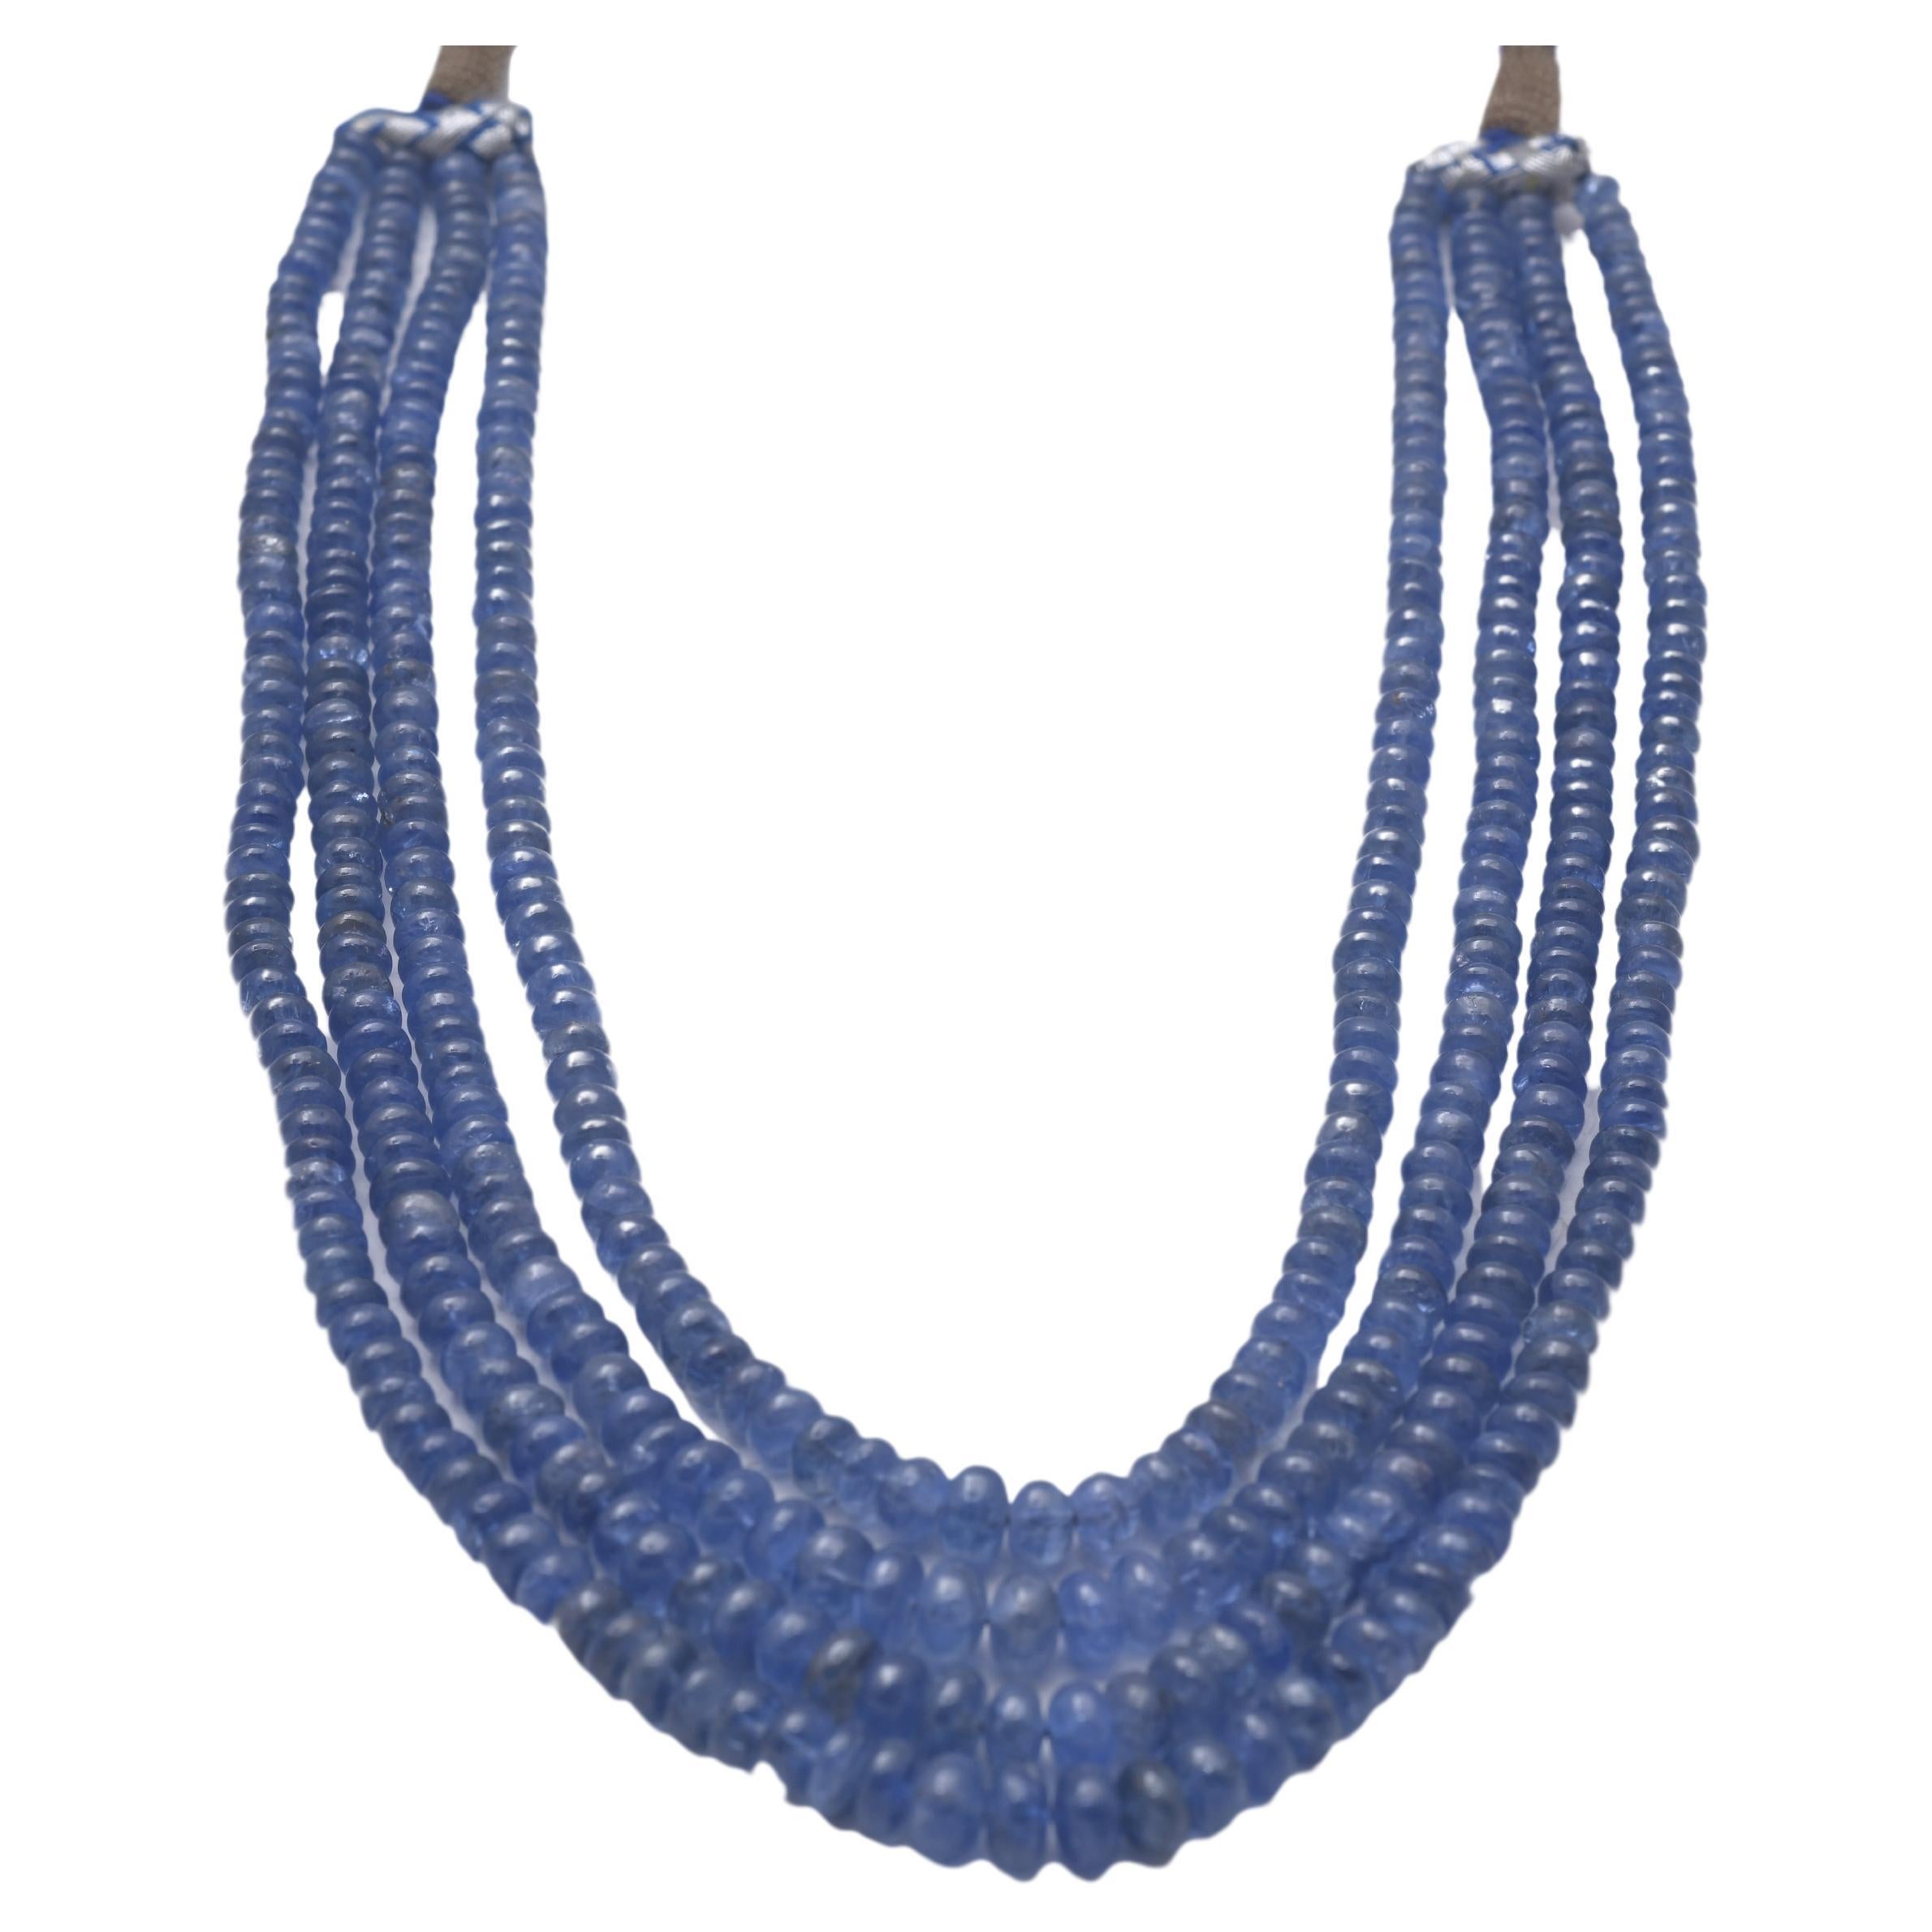 Blue Sapphire String Necklace